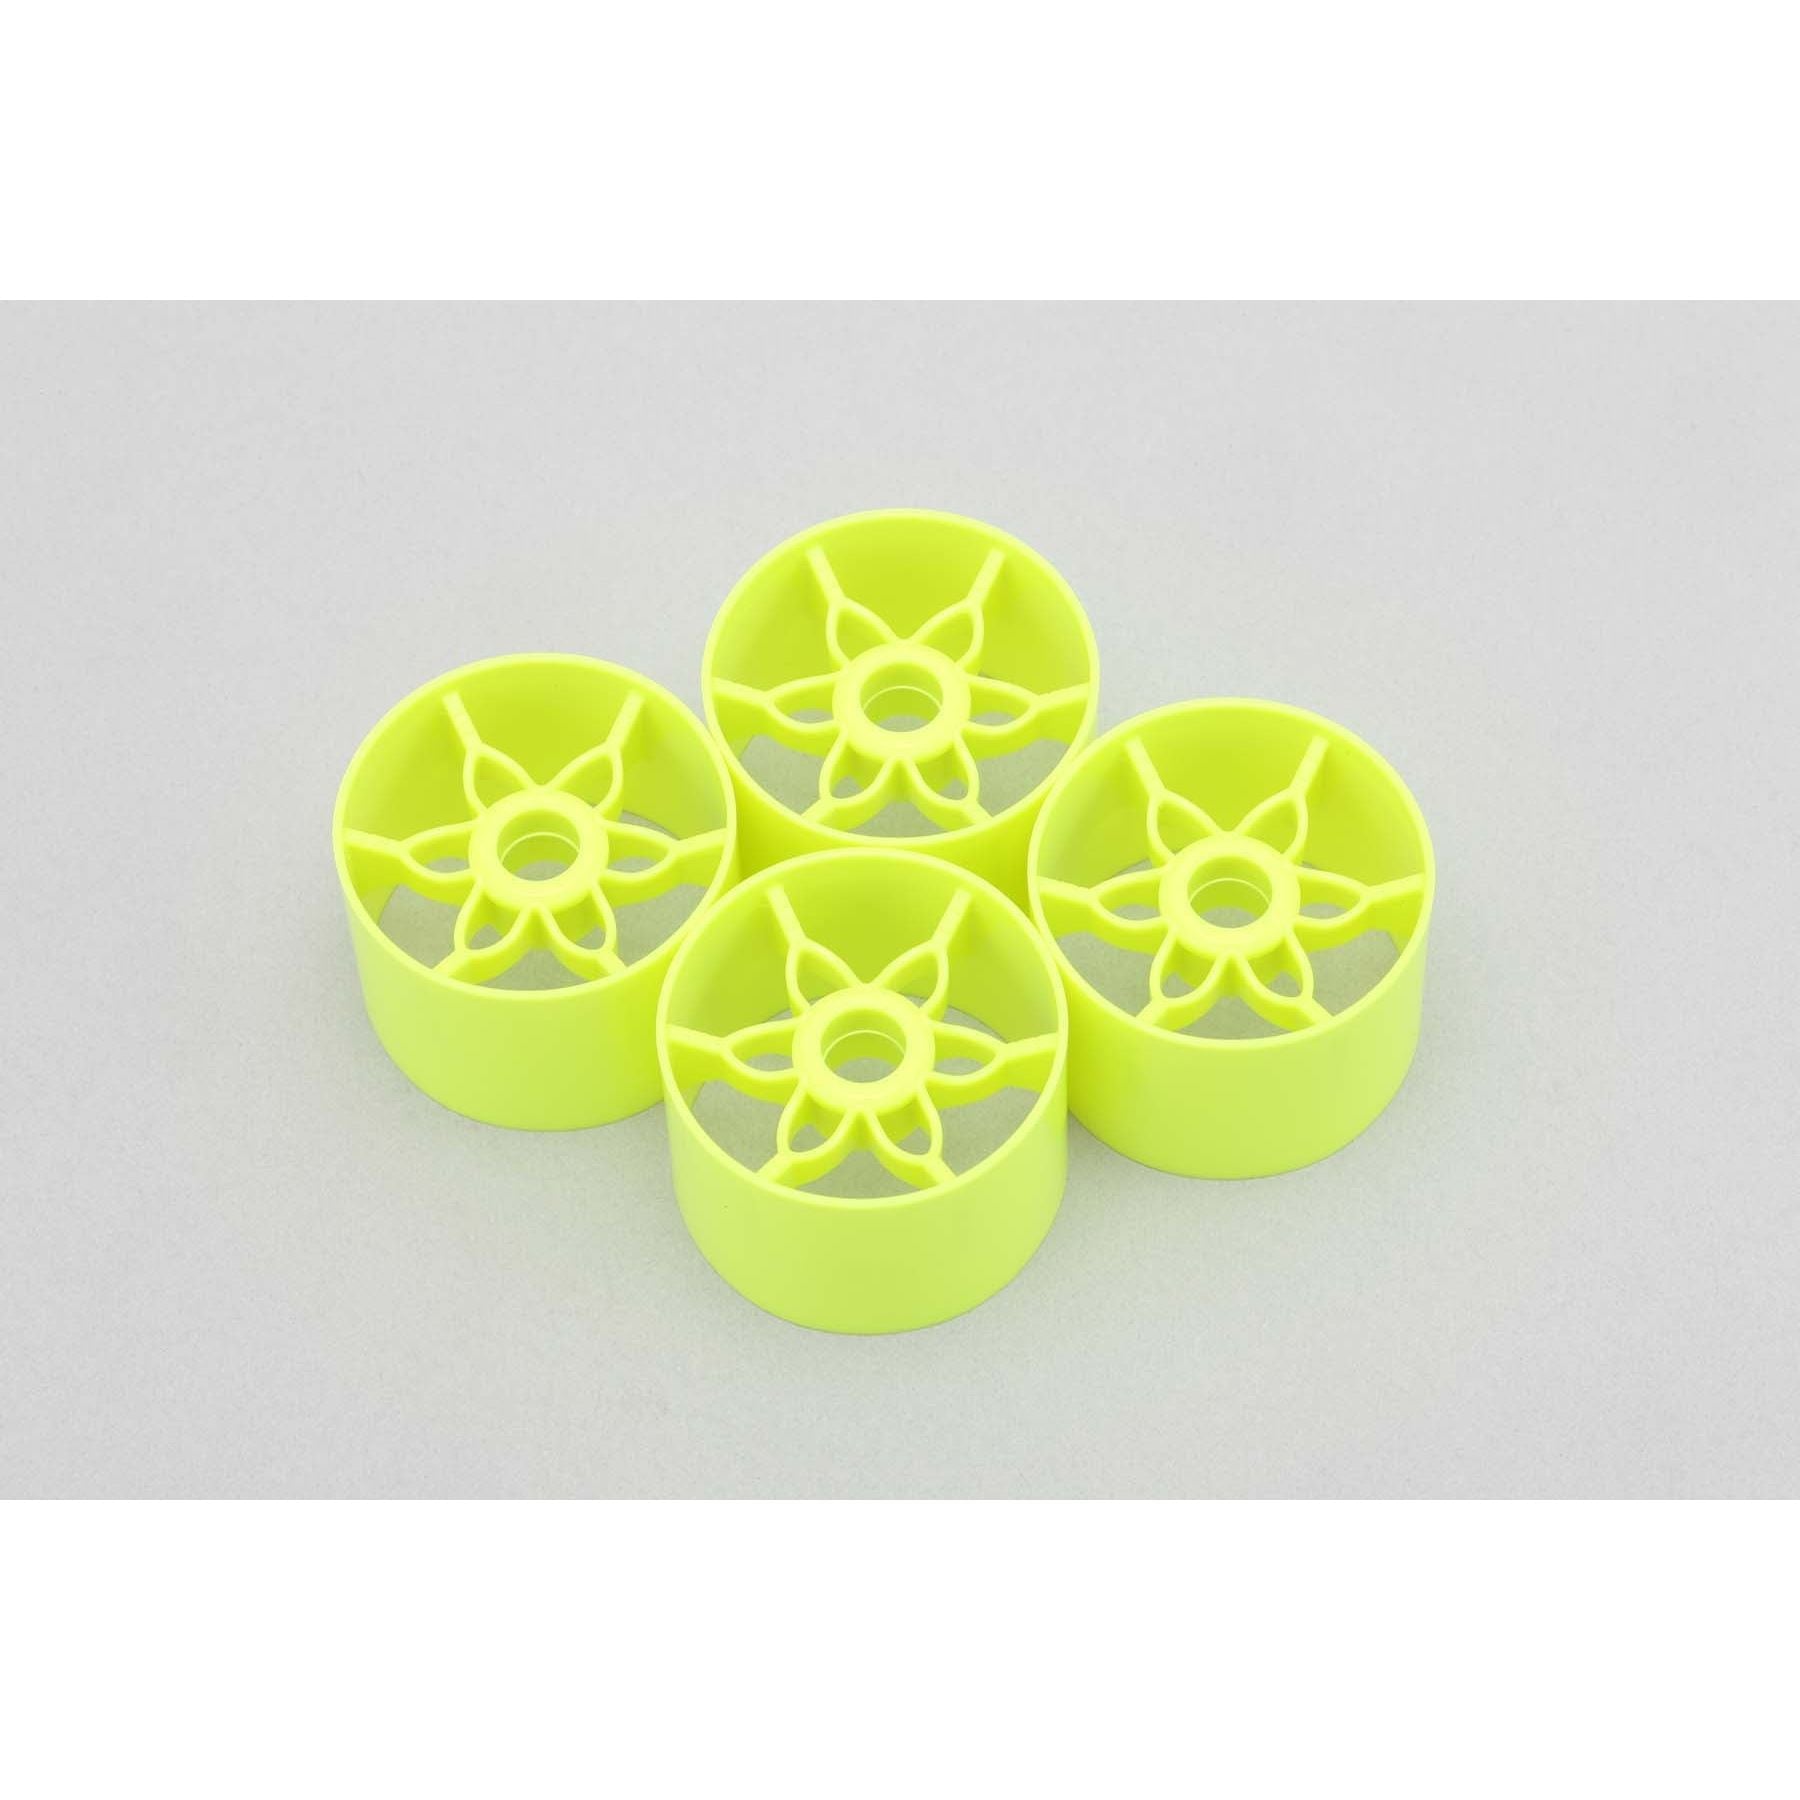 YOKOMO Front Wheels Rims Only x 4 (Yellow) for 1/12th Scale